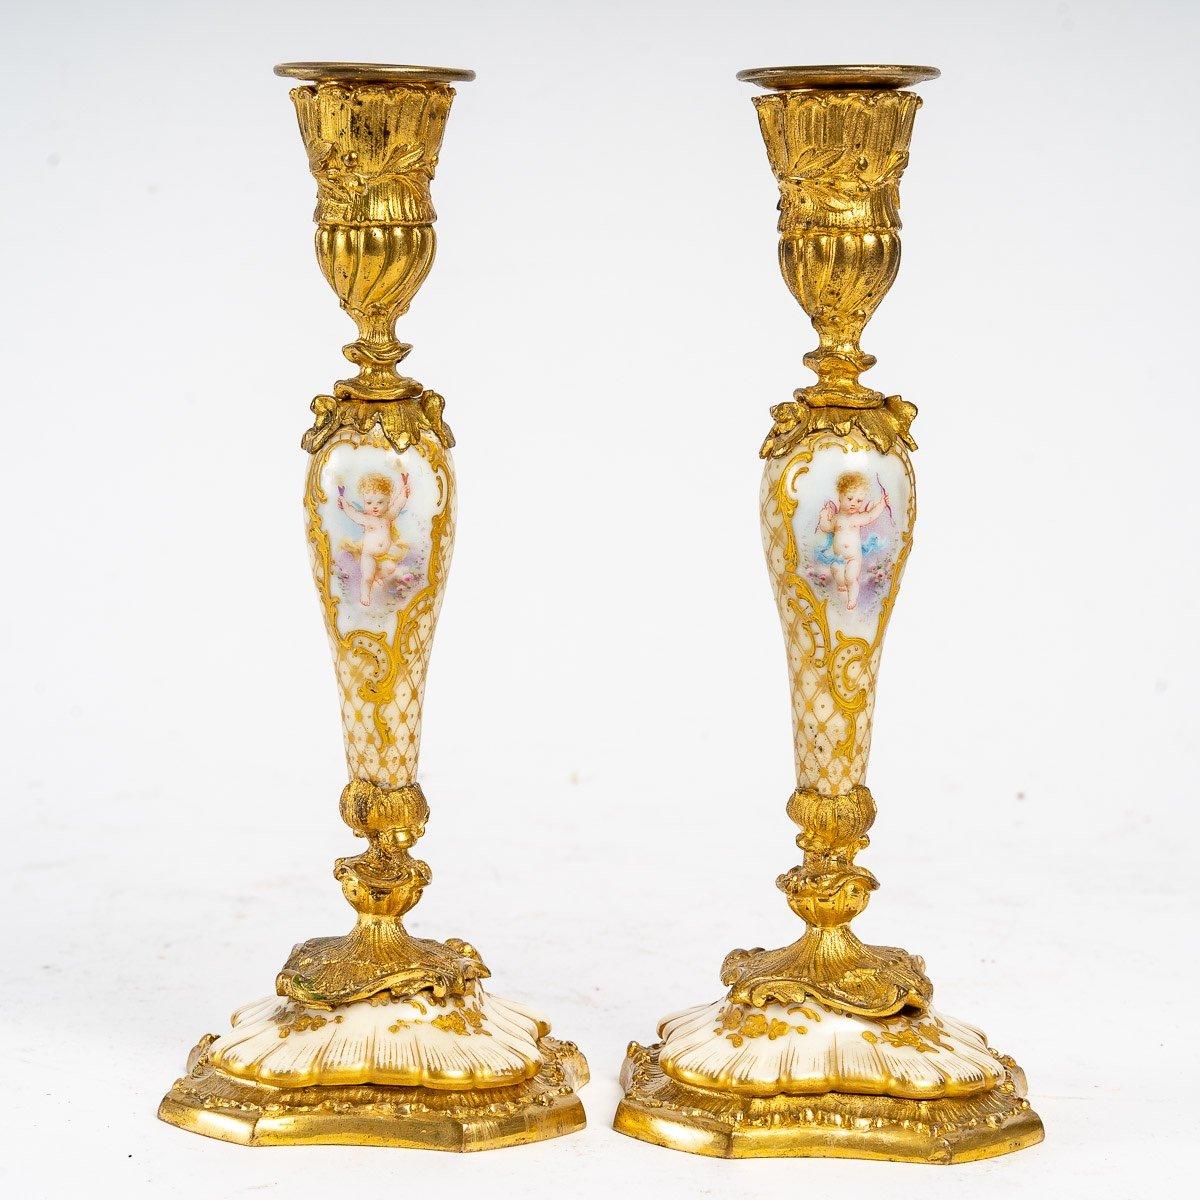 Pair of Gilt Bronze and Porcelain Candlesticks, Louis XV Style 1